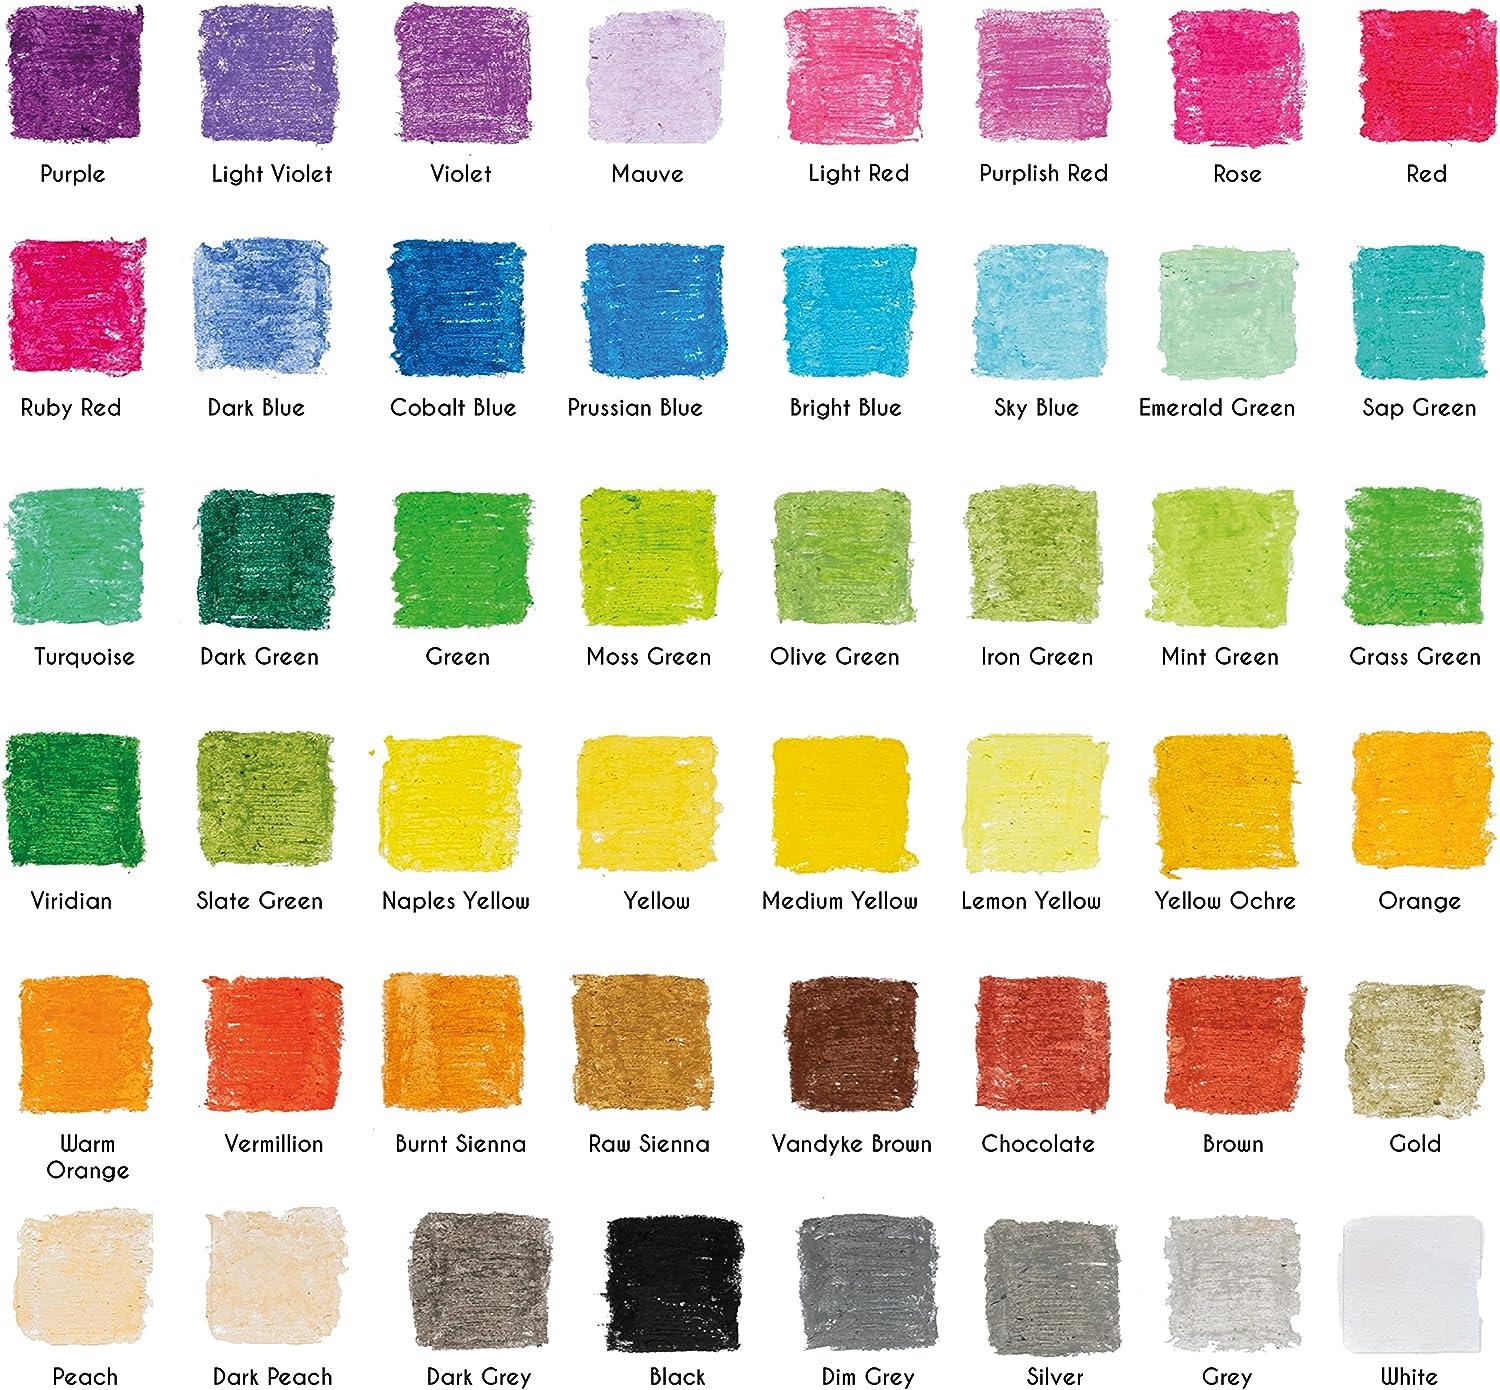  32 Pages Oil Pastel Paper Pad Set - 4 Shades of